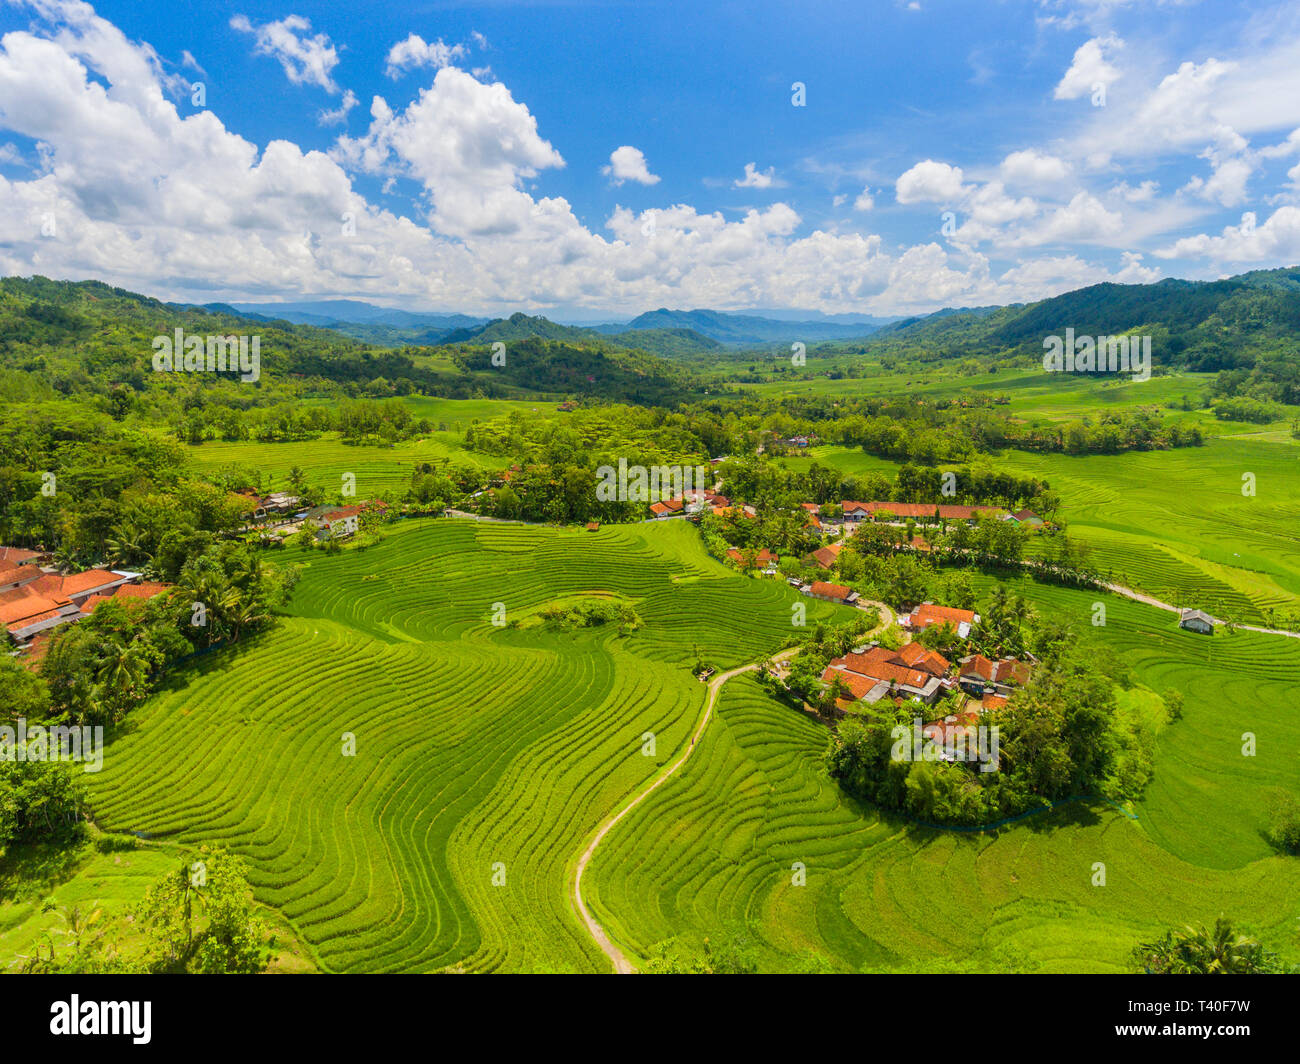 Rolling landscape of paddy rice fields interrupted by hamlets Stock Photo